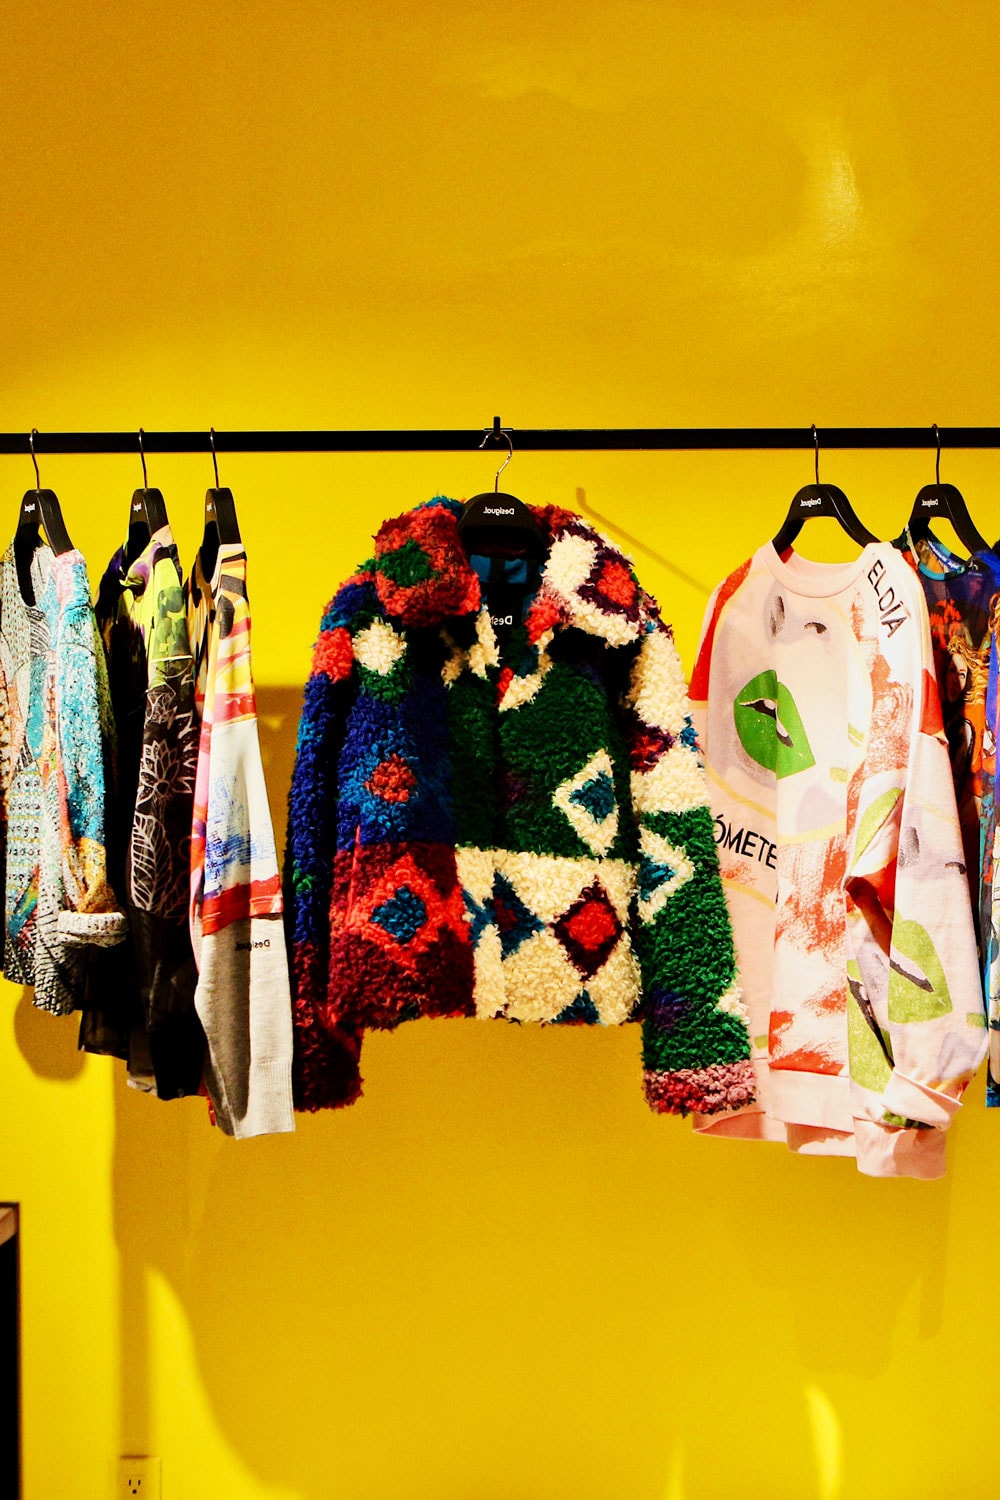 Desigual "The Art of Sustainability" ECOALF Collection New York Pop Up